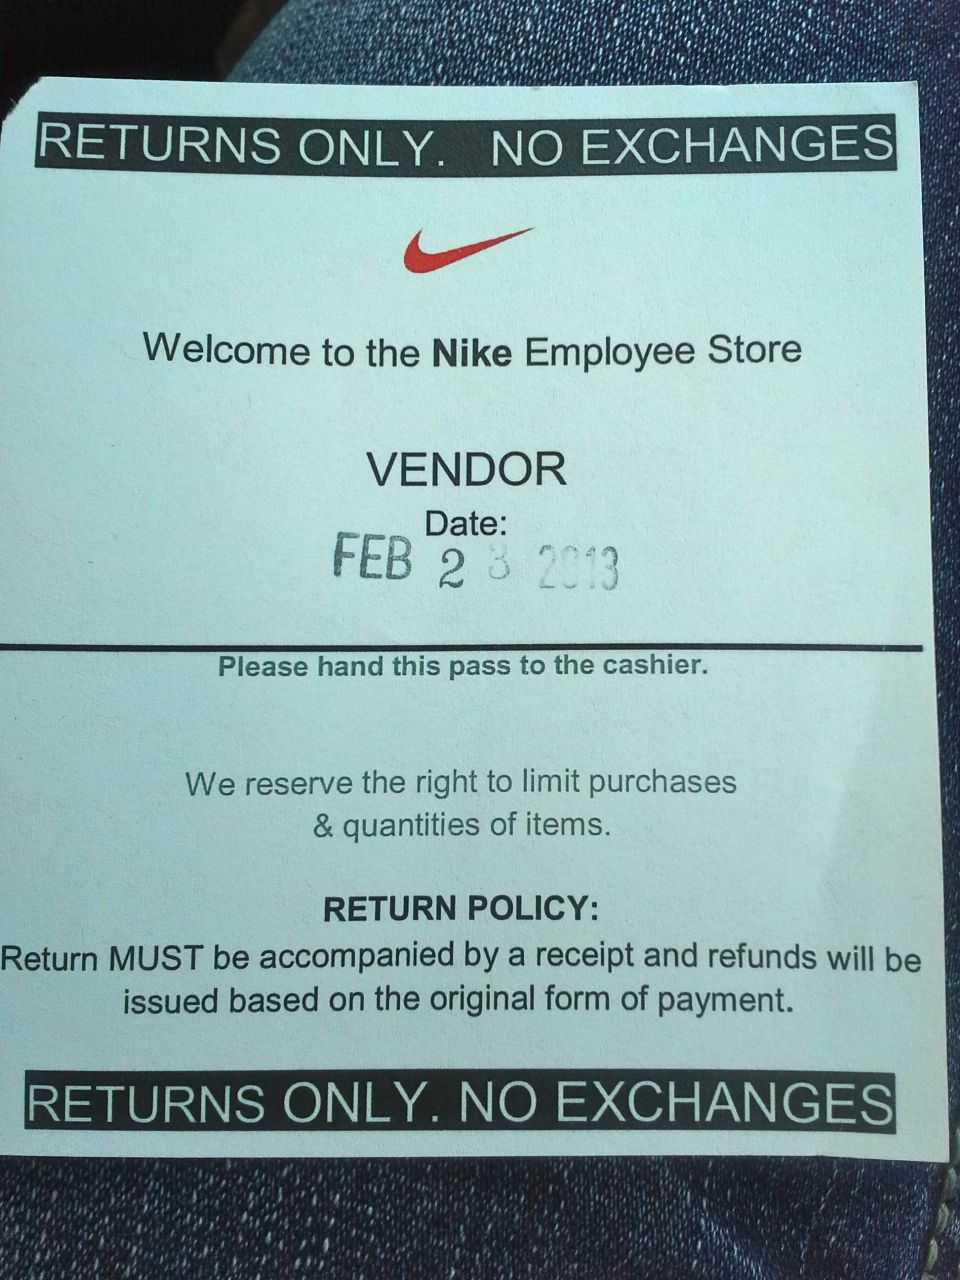 How to Get Nike Employee Store Pass  